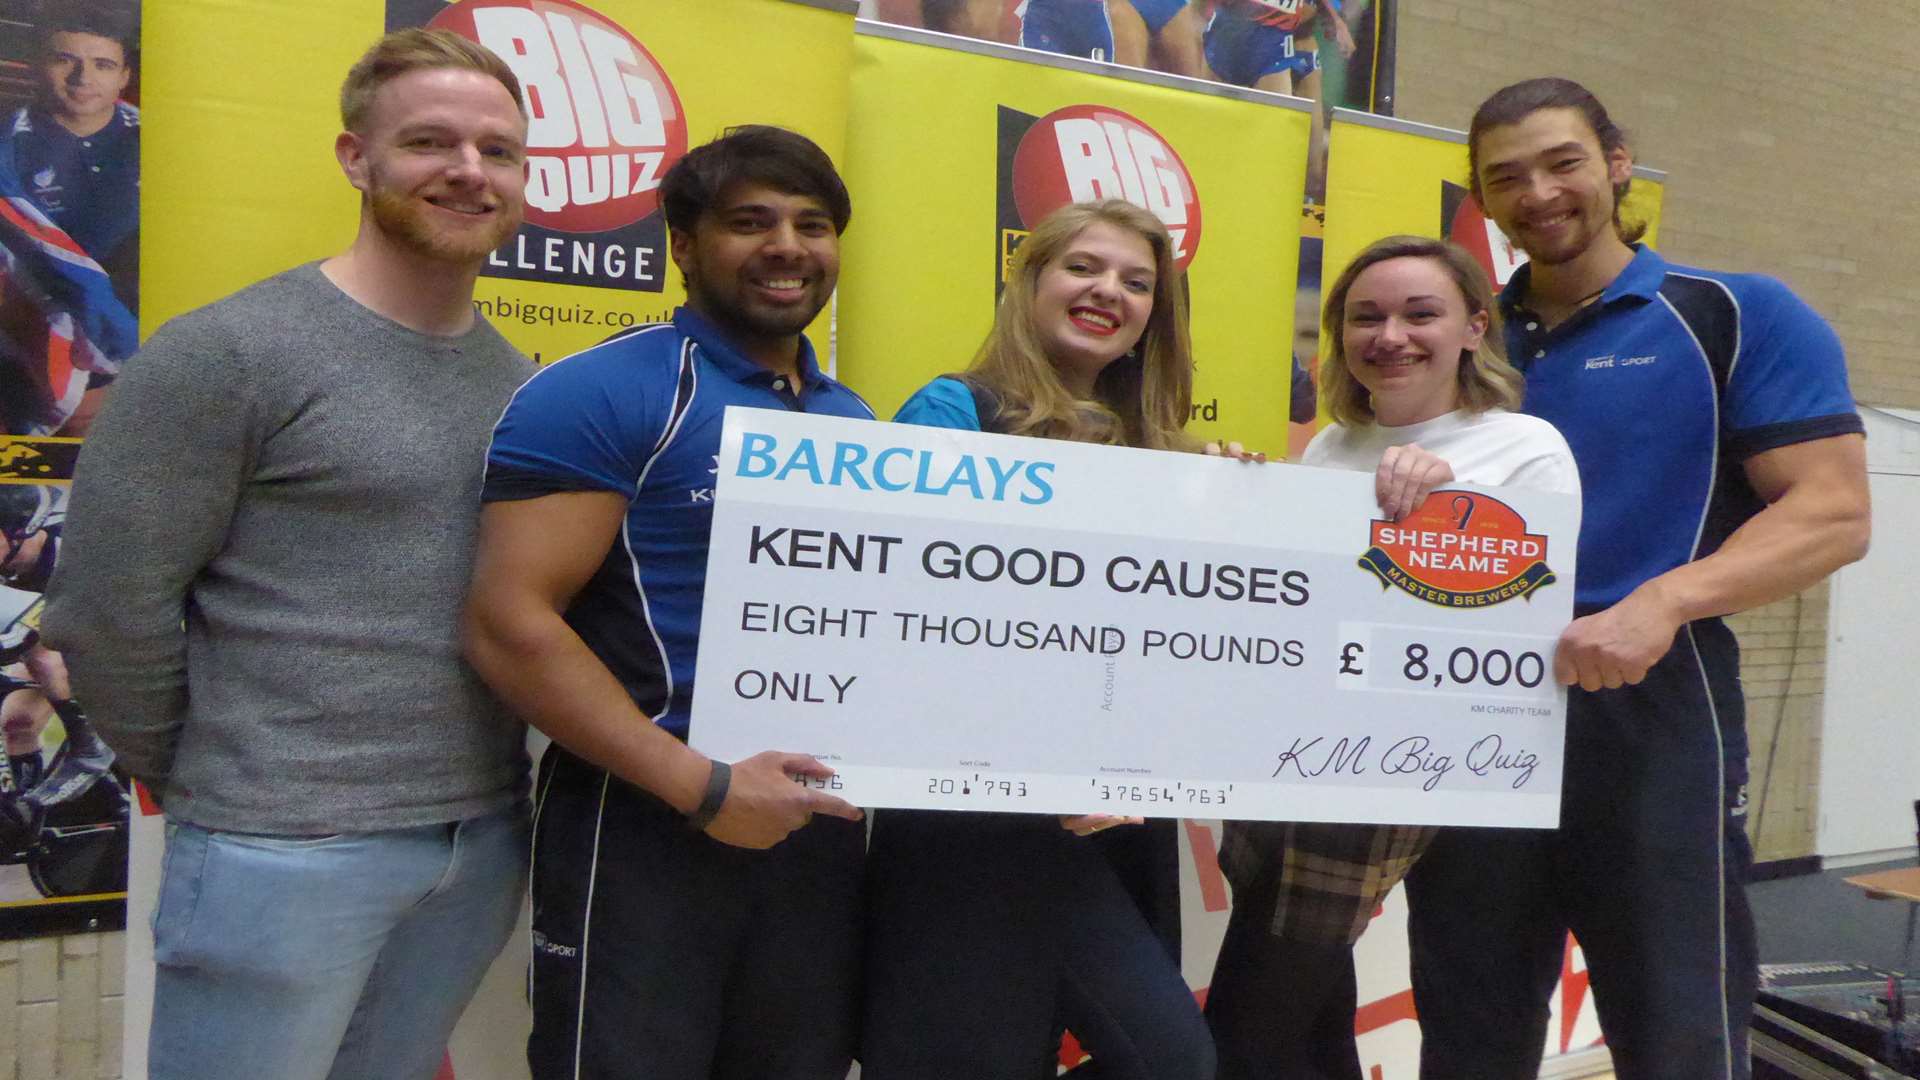 Joe Walker of the Kentish Gazette, Arik Vadevalloo of Kent Sport, Rebecca Hadley and Zoe Berry of Barclays joined Alex Atkins of Kent Sport to announce the amount raised for charity at last year's Canterbury KM Big Quiz event.